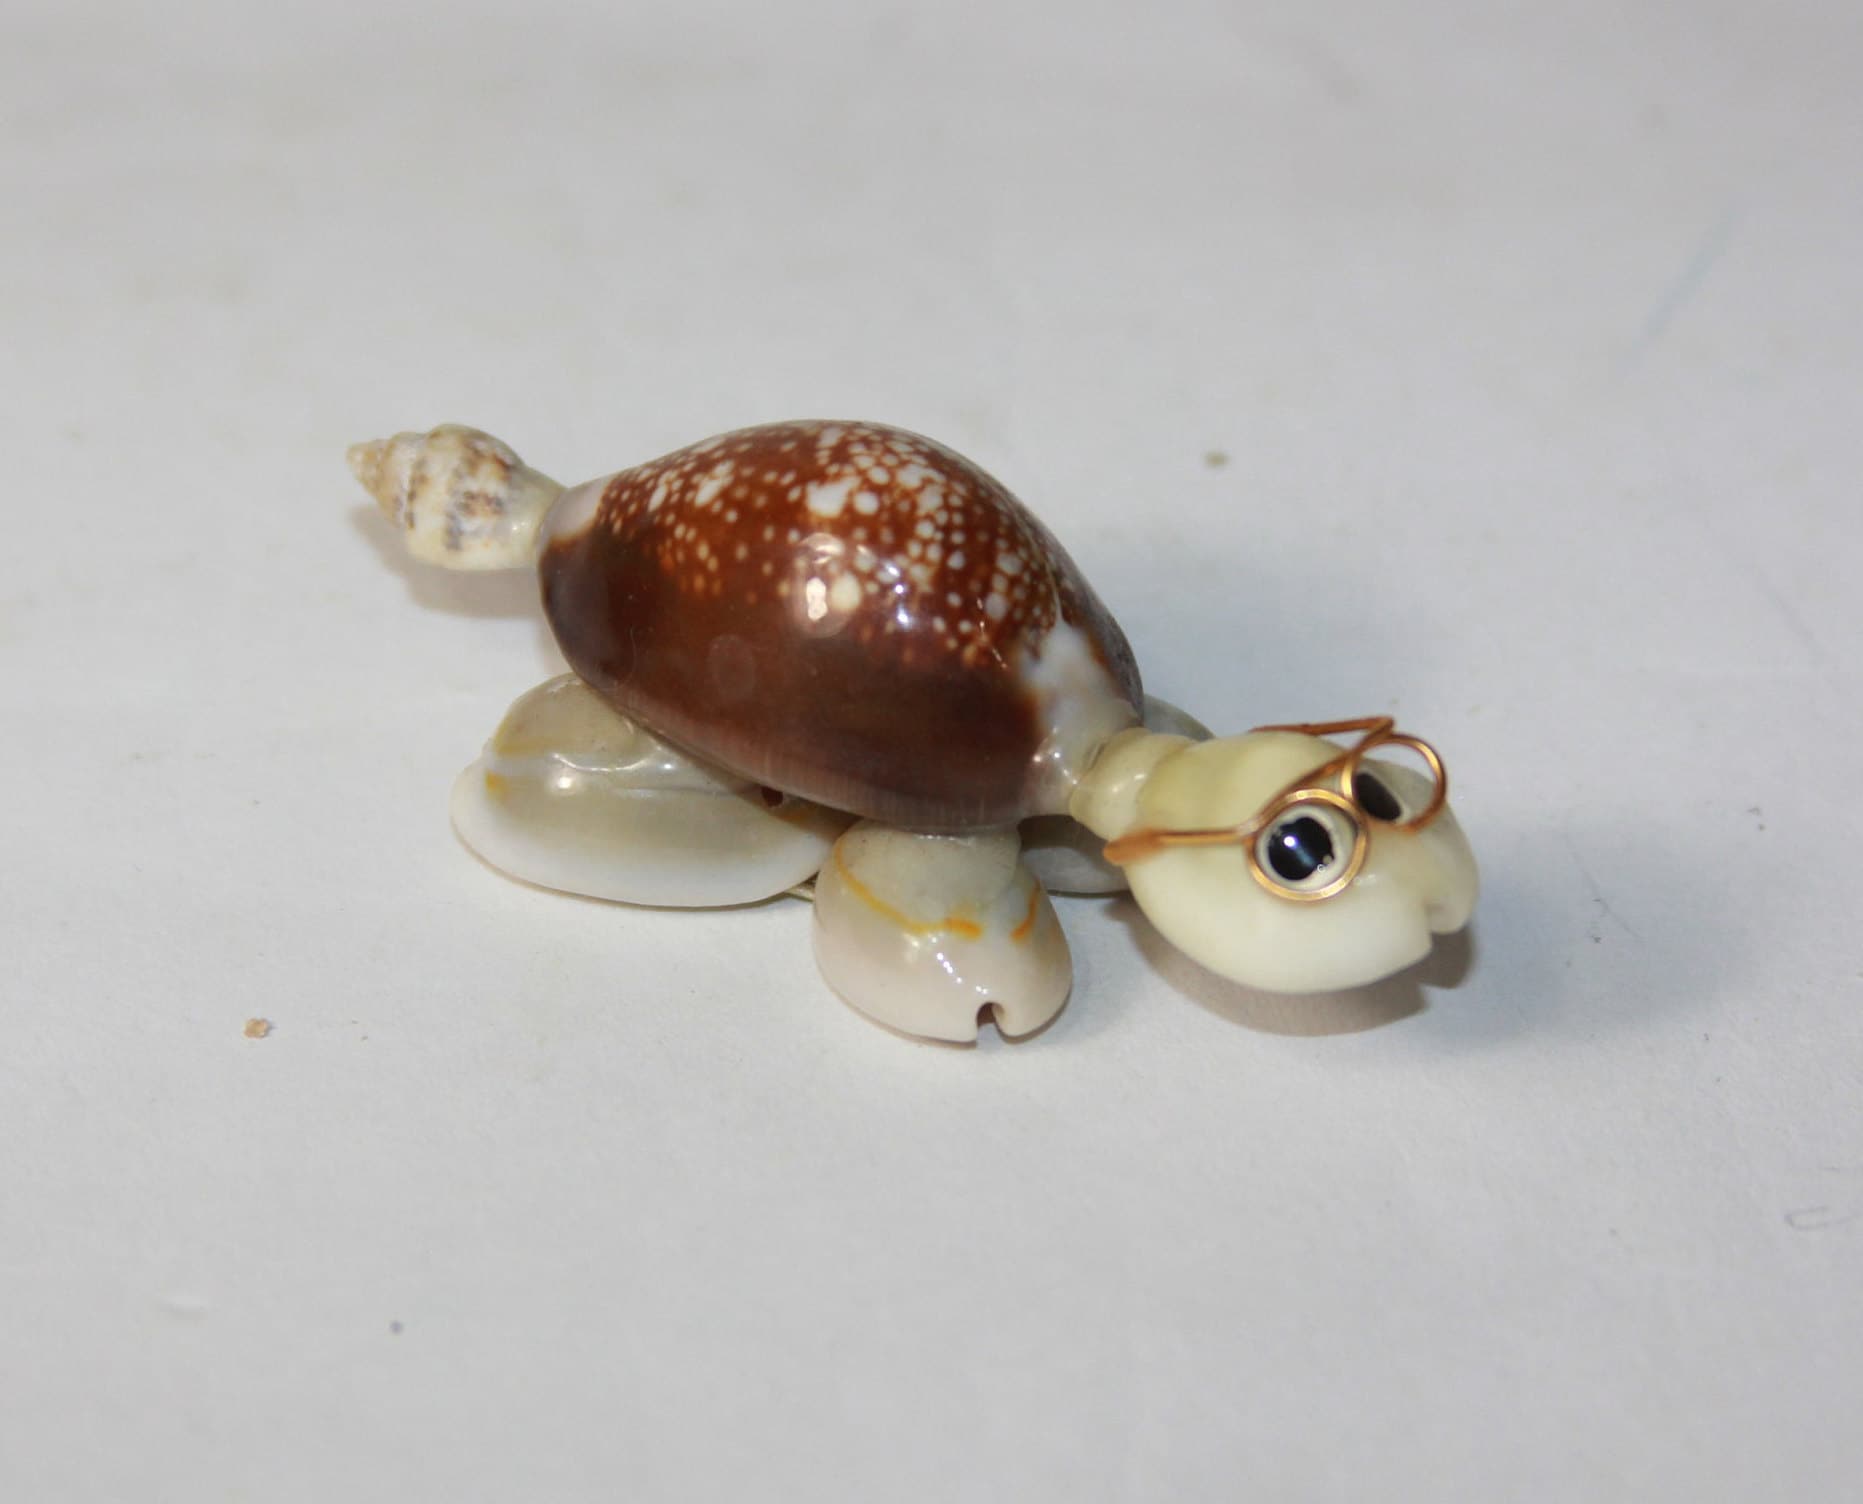 CUTEST Tiny Turtles With Glasses And Googly Eyes Seashell Cowrie